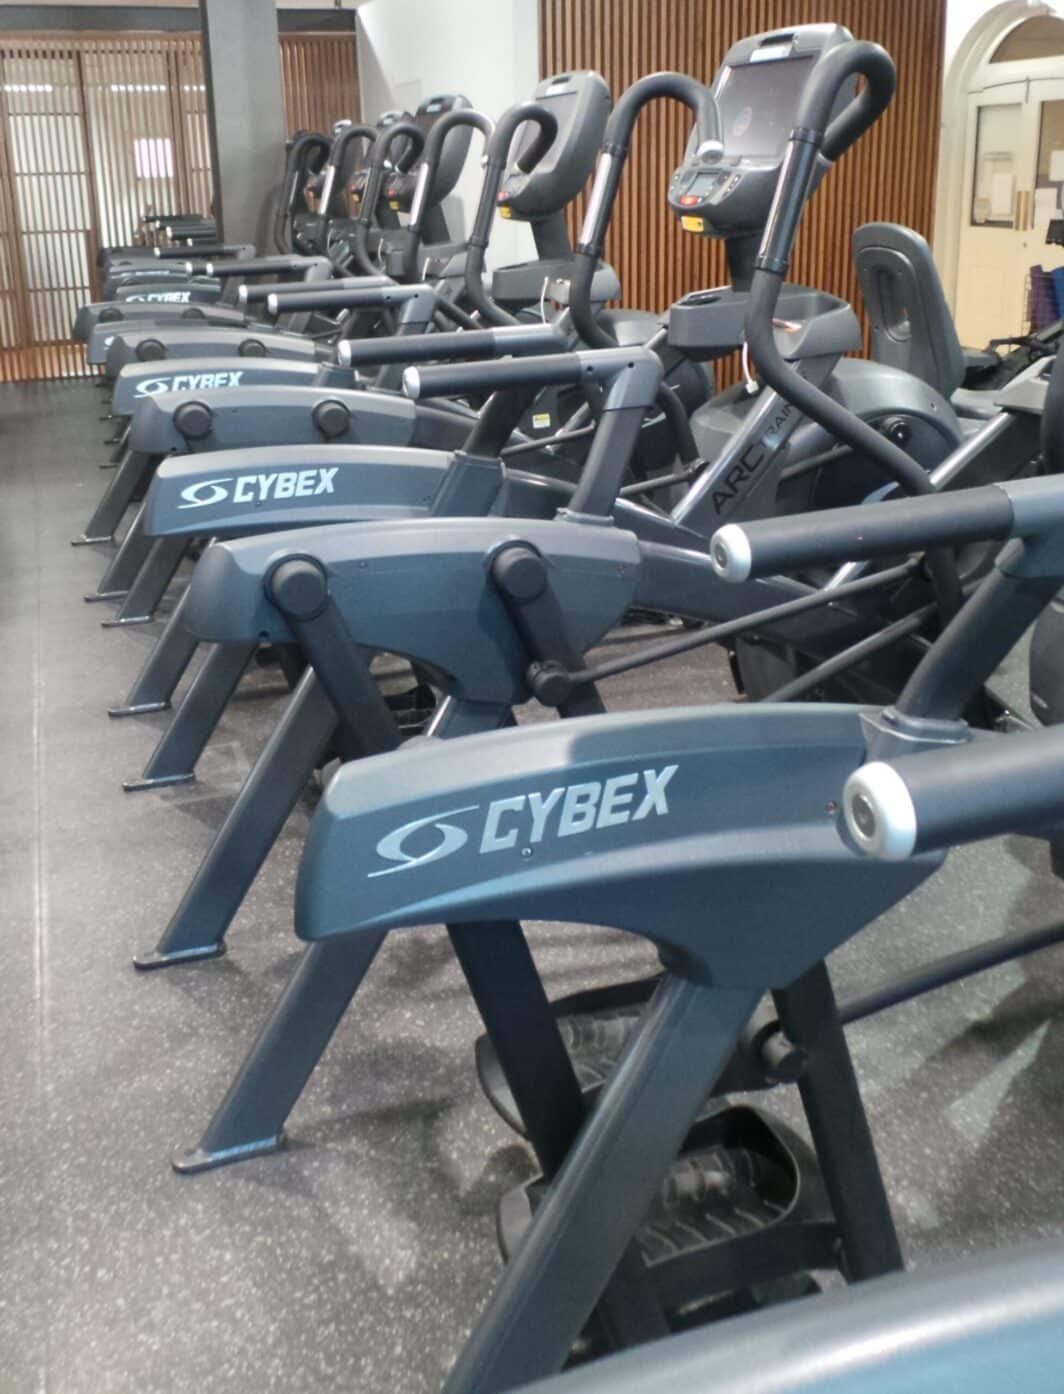 Cybex 770AT Arc Trainer 2nd hand commercial gym equipment for sale